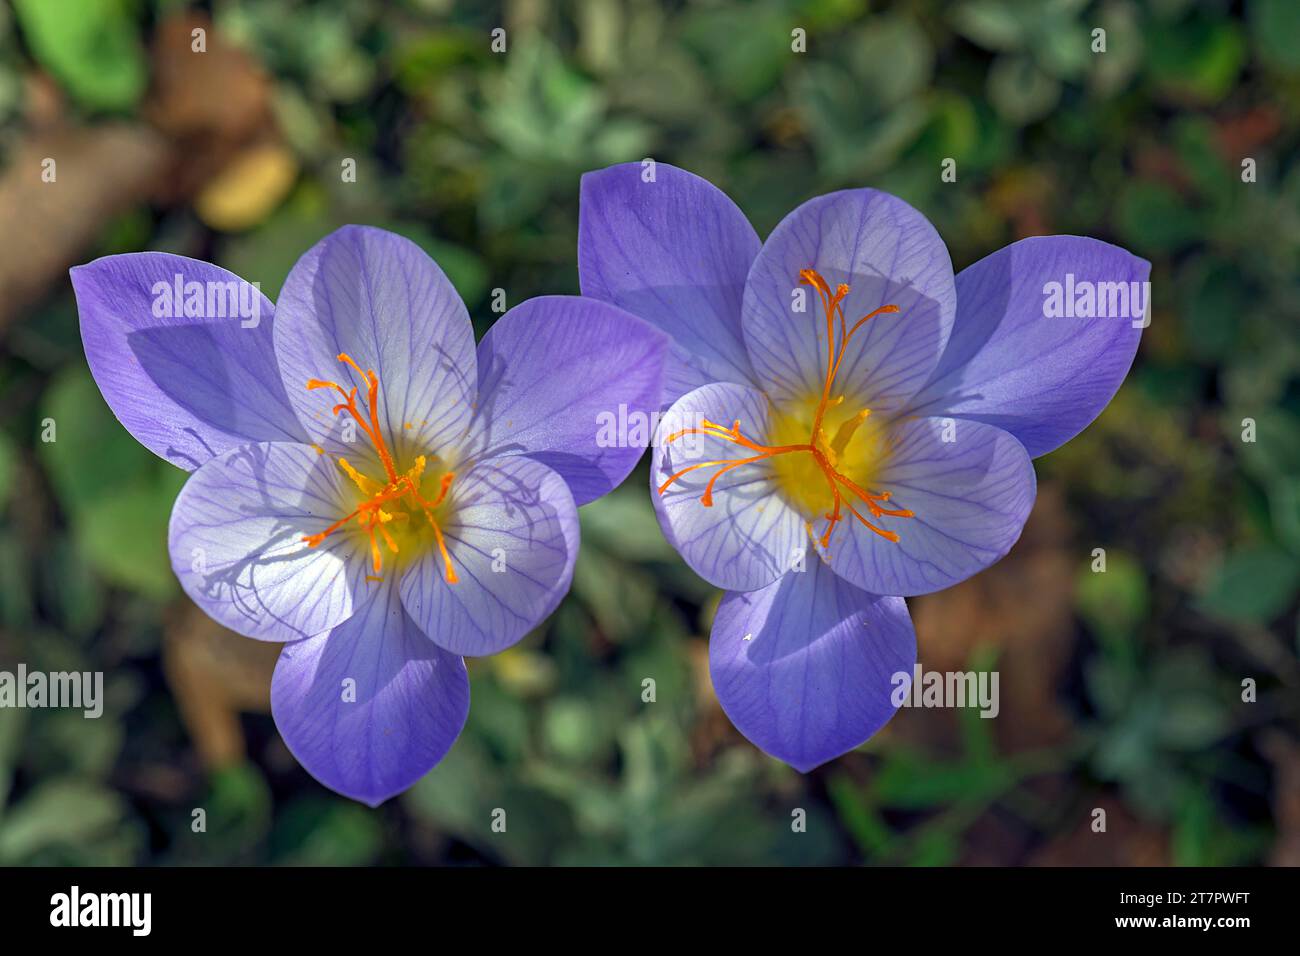 Flowers of the meadow saffron (Colchicum autumnale), Bavaria, Germany Stock Photo